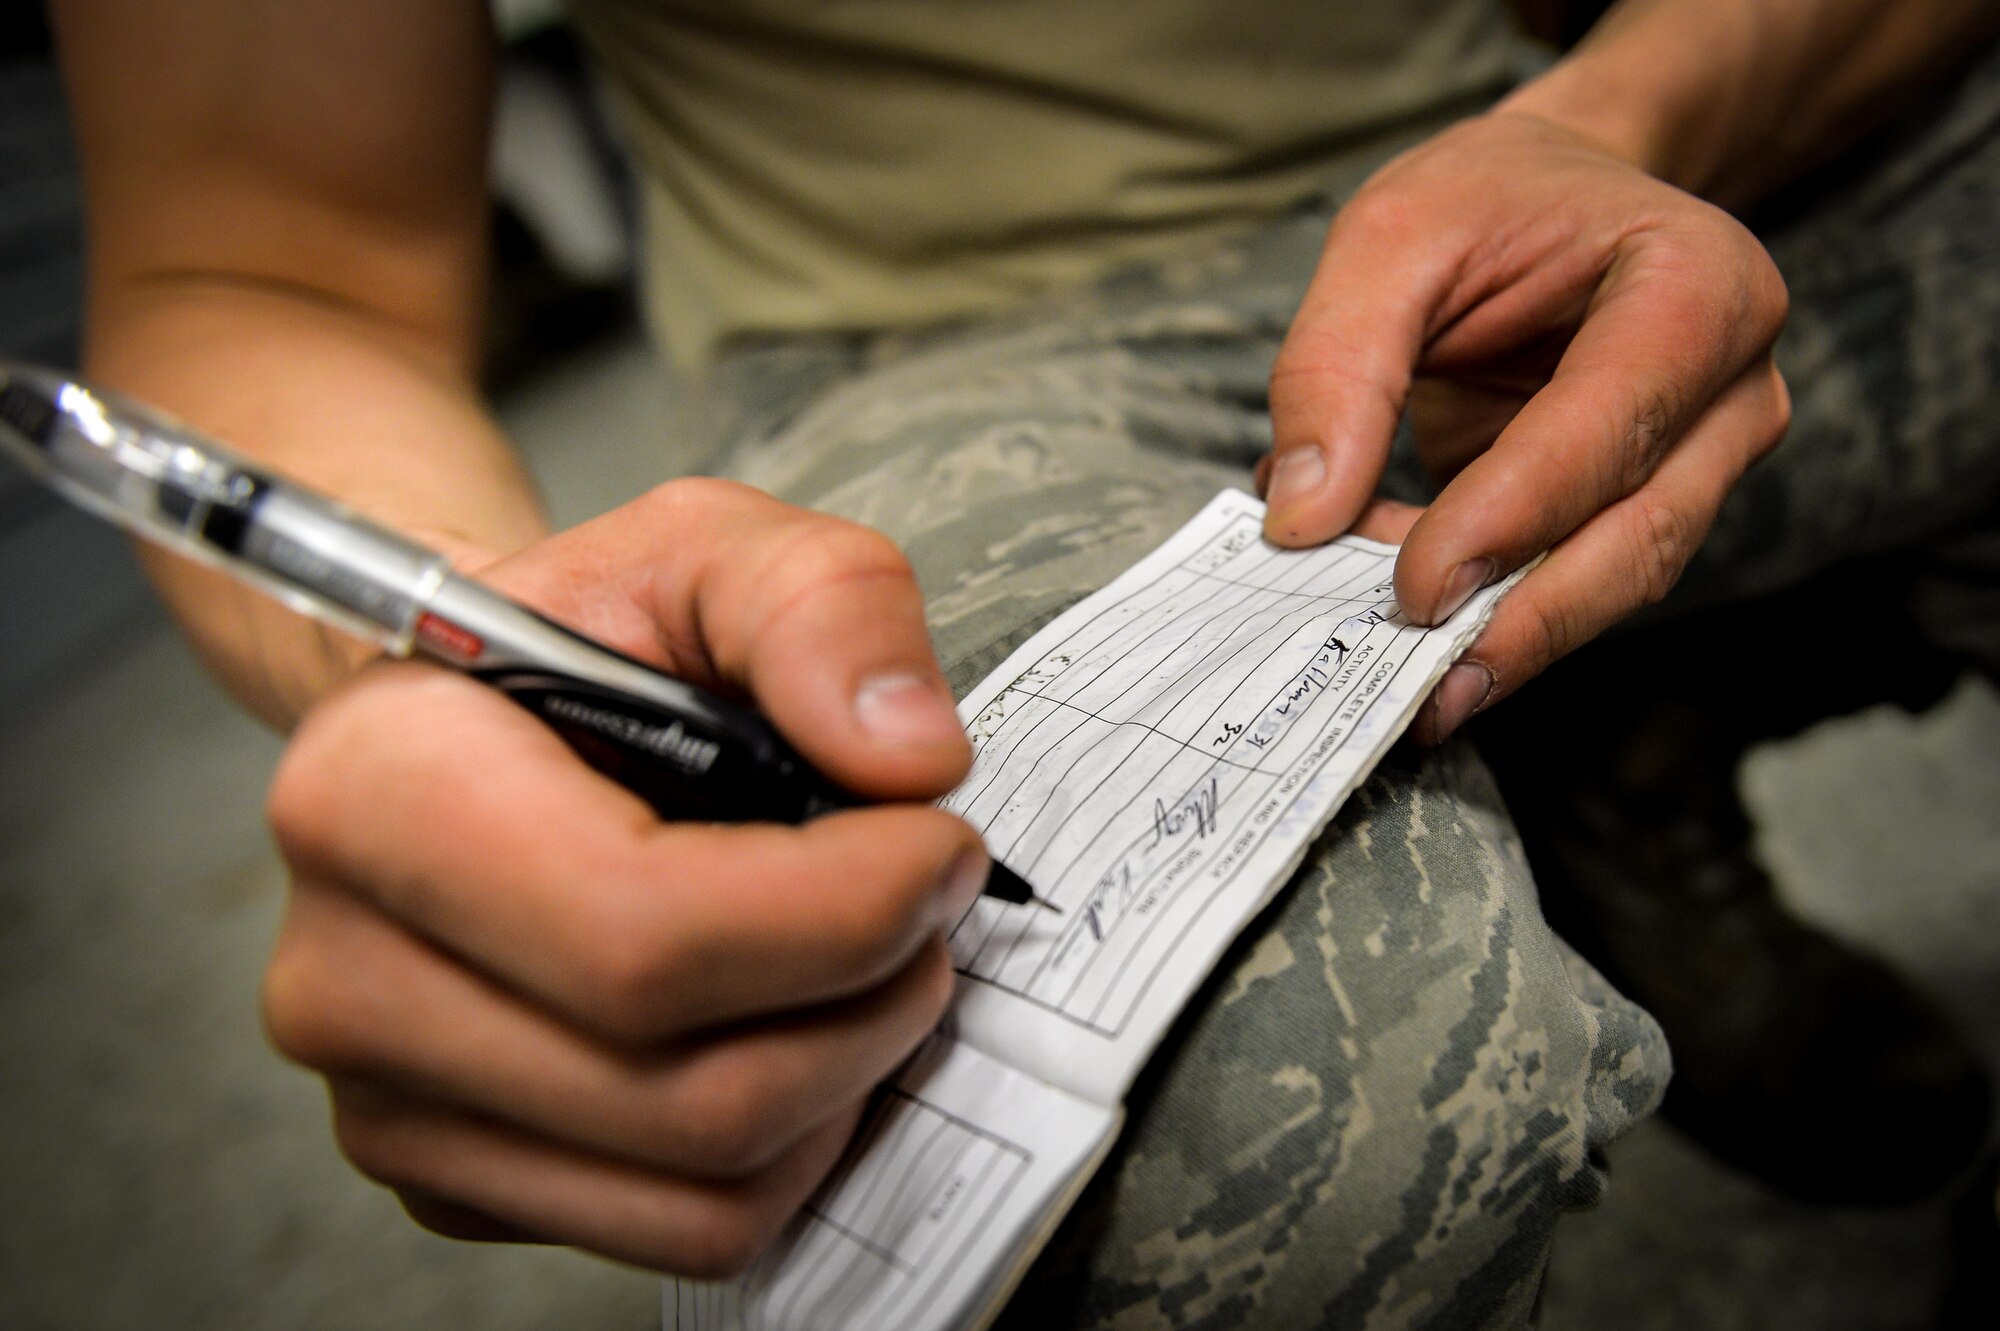 Senior Airman Scott Plummer, 2nd Operations Support Squadron aircrew flight equipment journeyman, updates a drag chute maintenance log at Barksdale Air Force Base, La., June 7, 2016. Plummer updated the log to reflect the correct number of canopy deployments for each chute. The data is used to troubleshoot any issues with the canopy and track usage. (U.S. Air Force photo/Senior Airman Mozer O. Da Cunha)